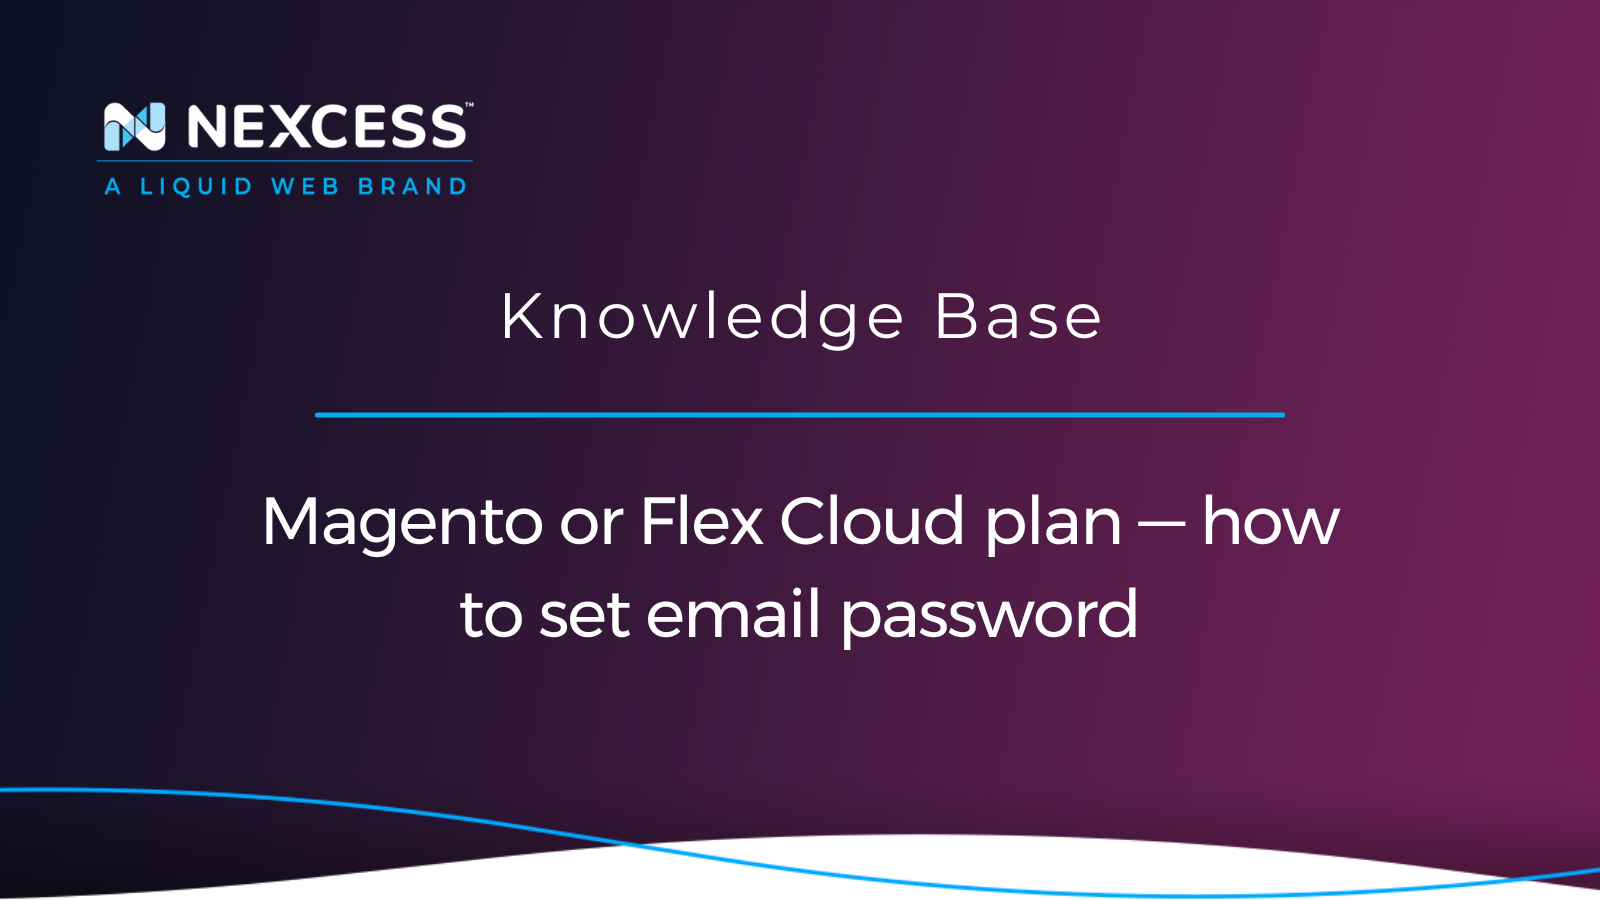 Magento or Flex Cloud plan — how to set email password